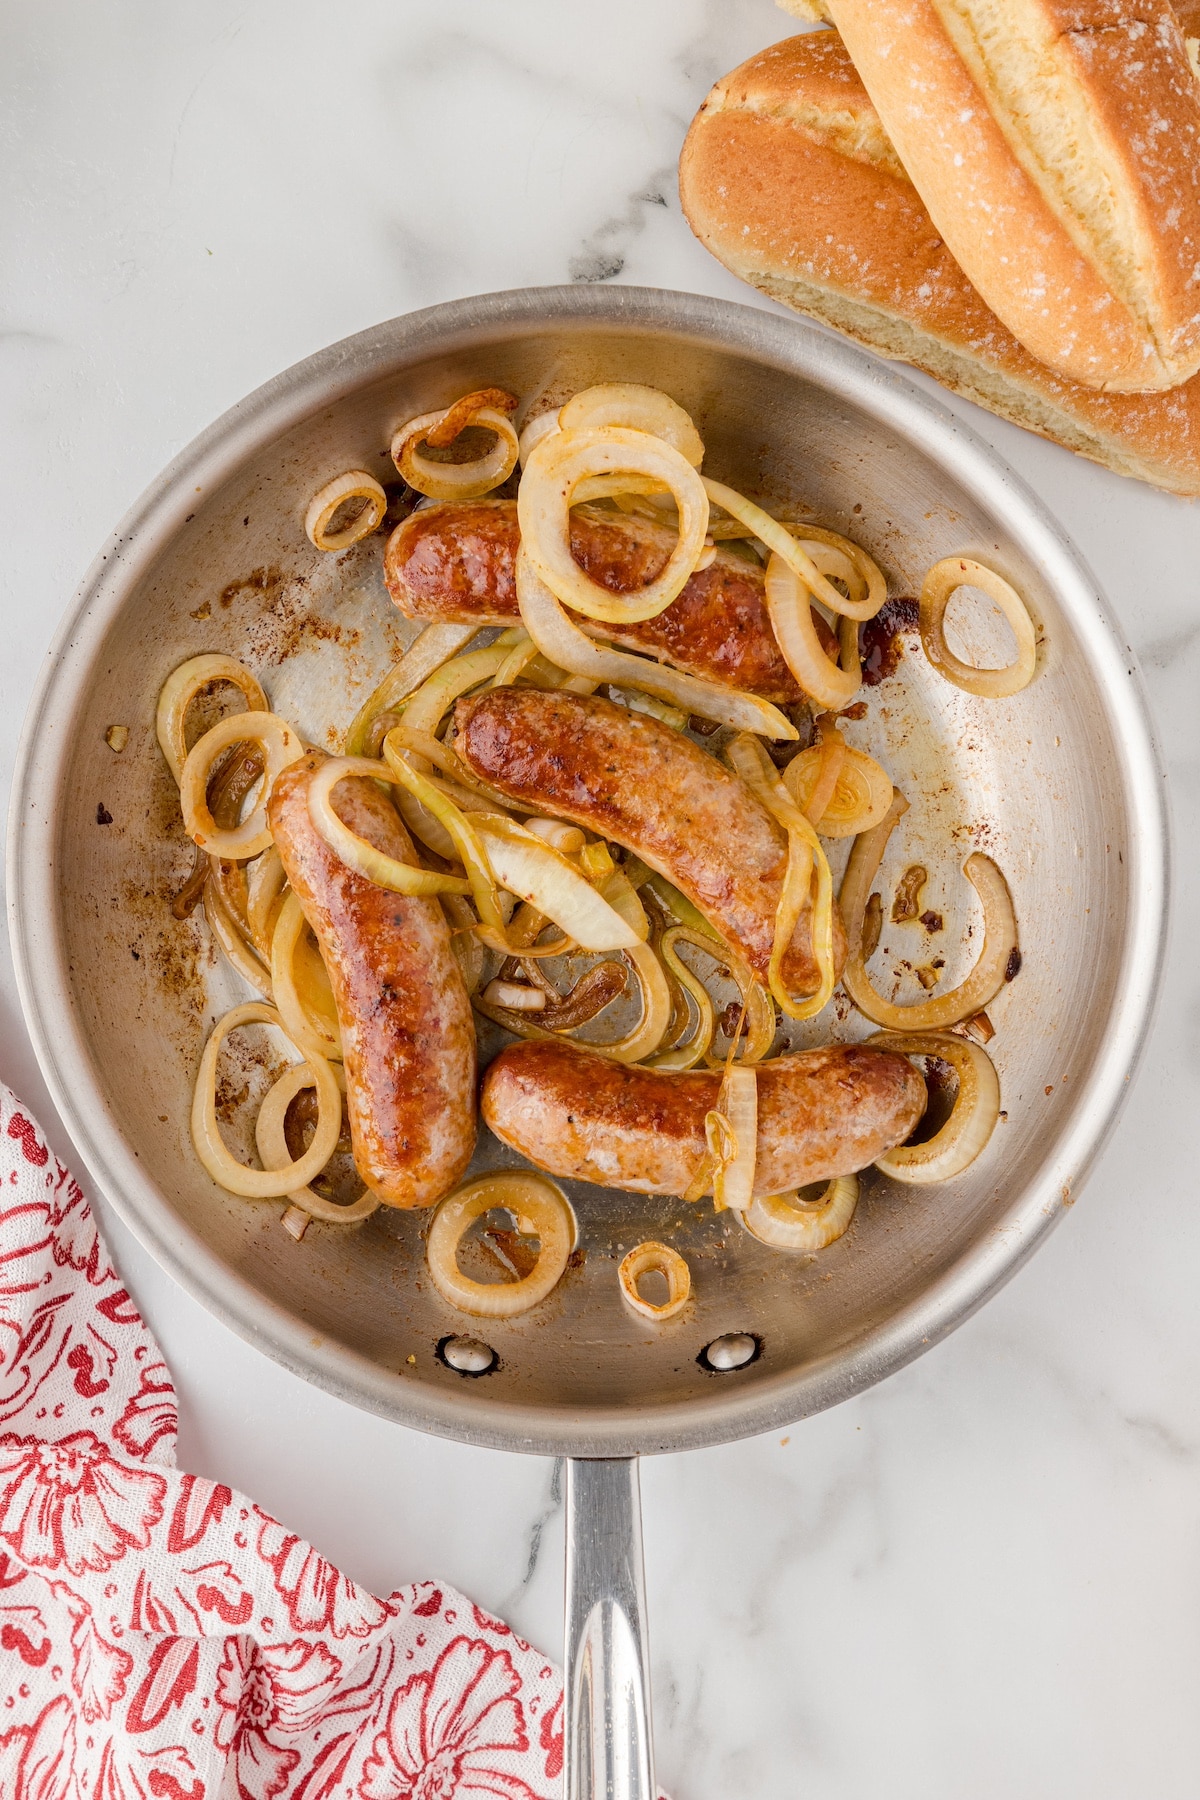 cooked onions and sausages in a skillet